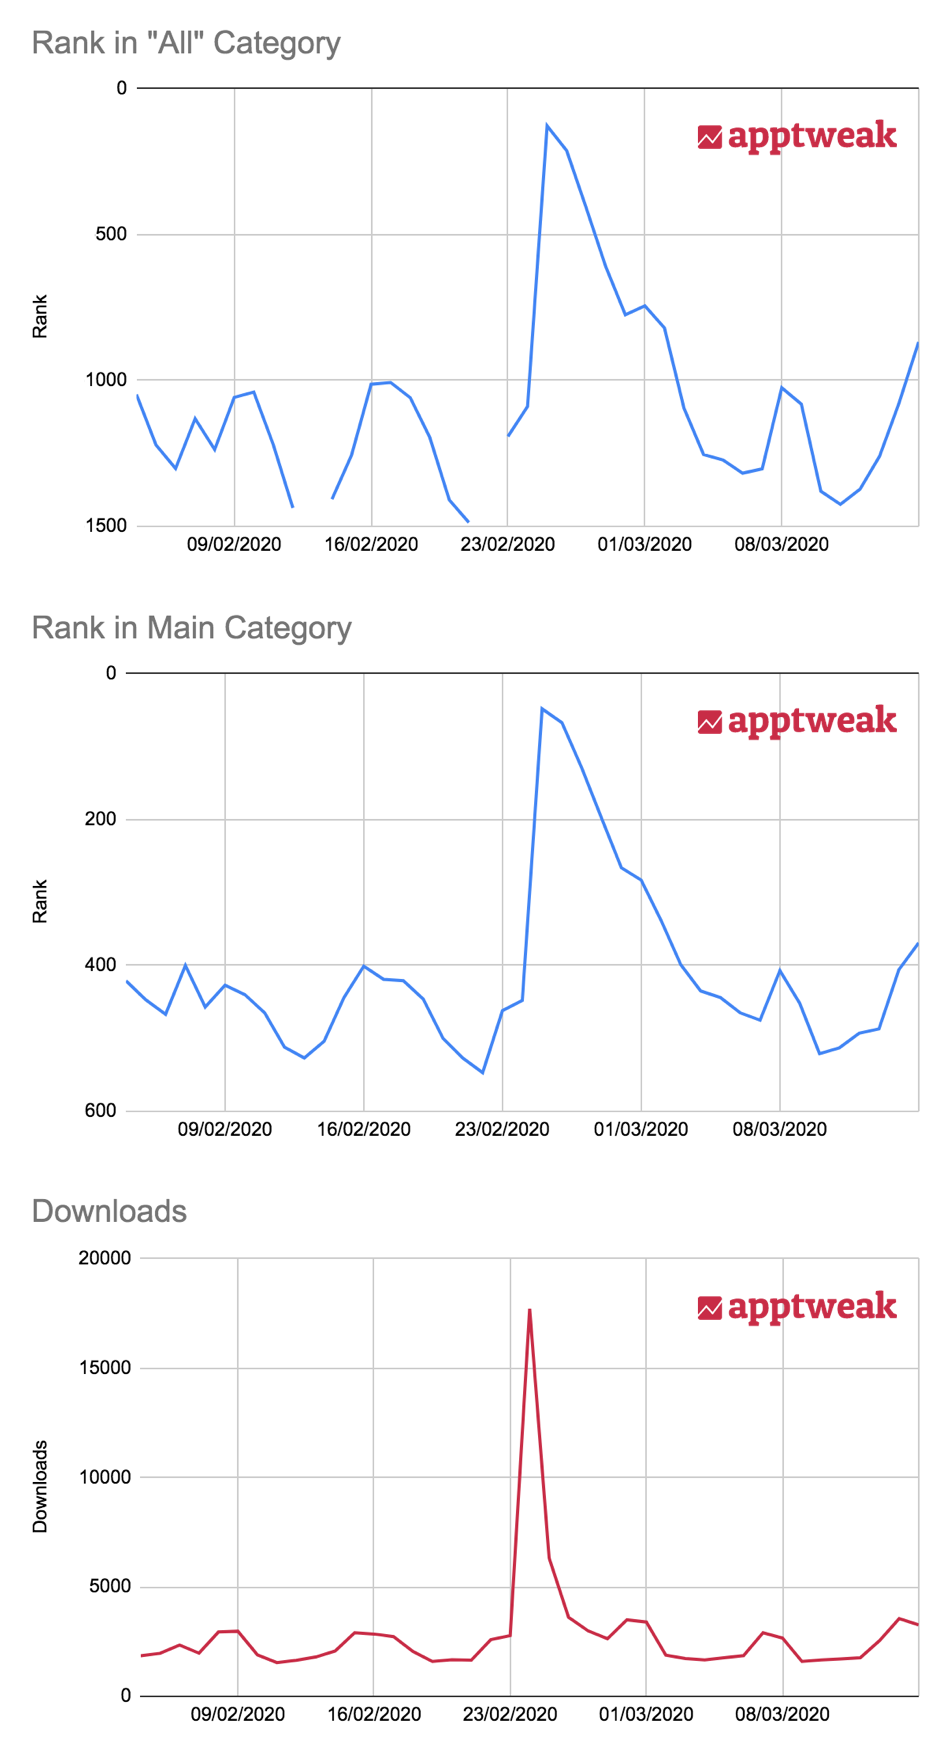 How Mobile App Downloads and Category Rank correlate